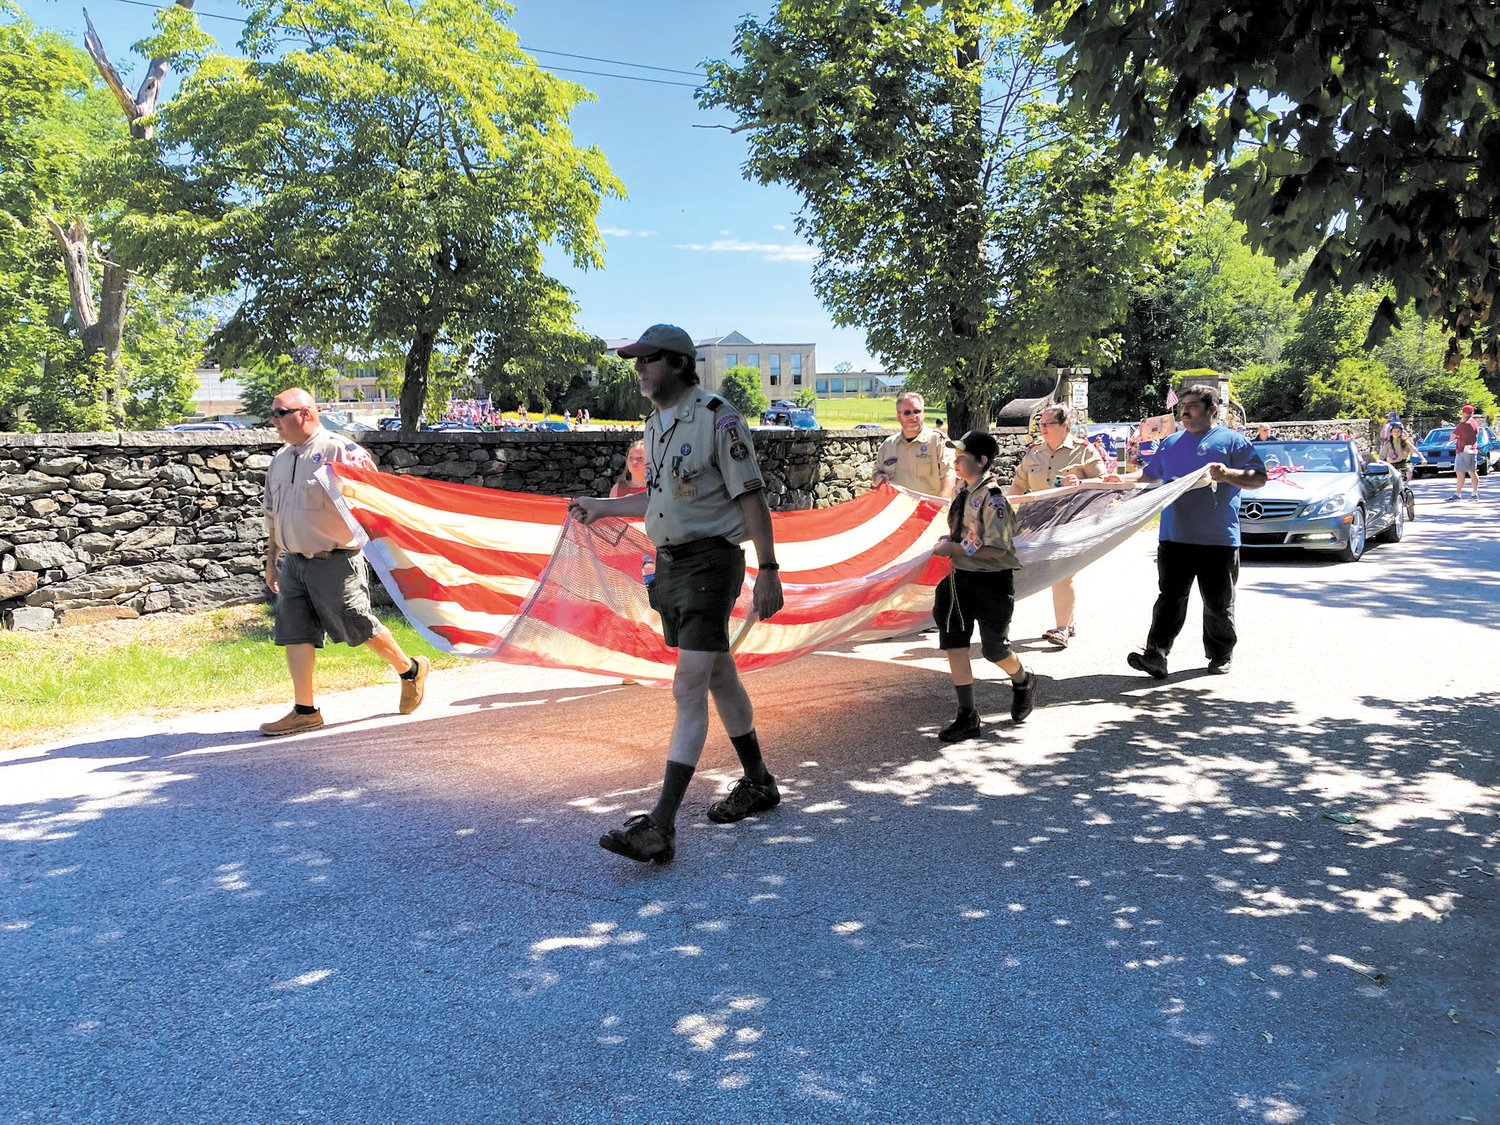 13 STRIPES & 45 STARS: This 1896 flag is a regular at the Warwick Neck parade.